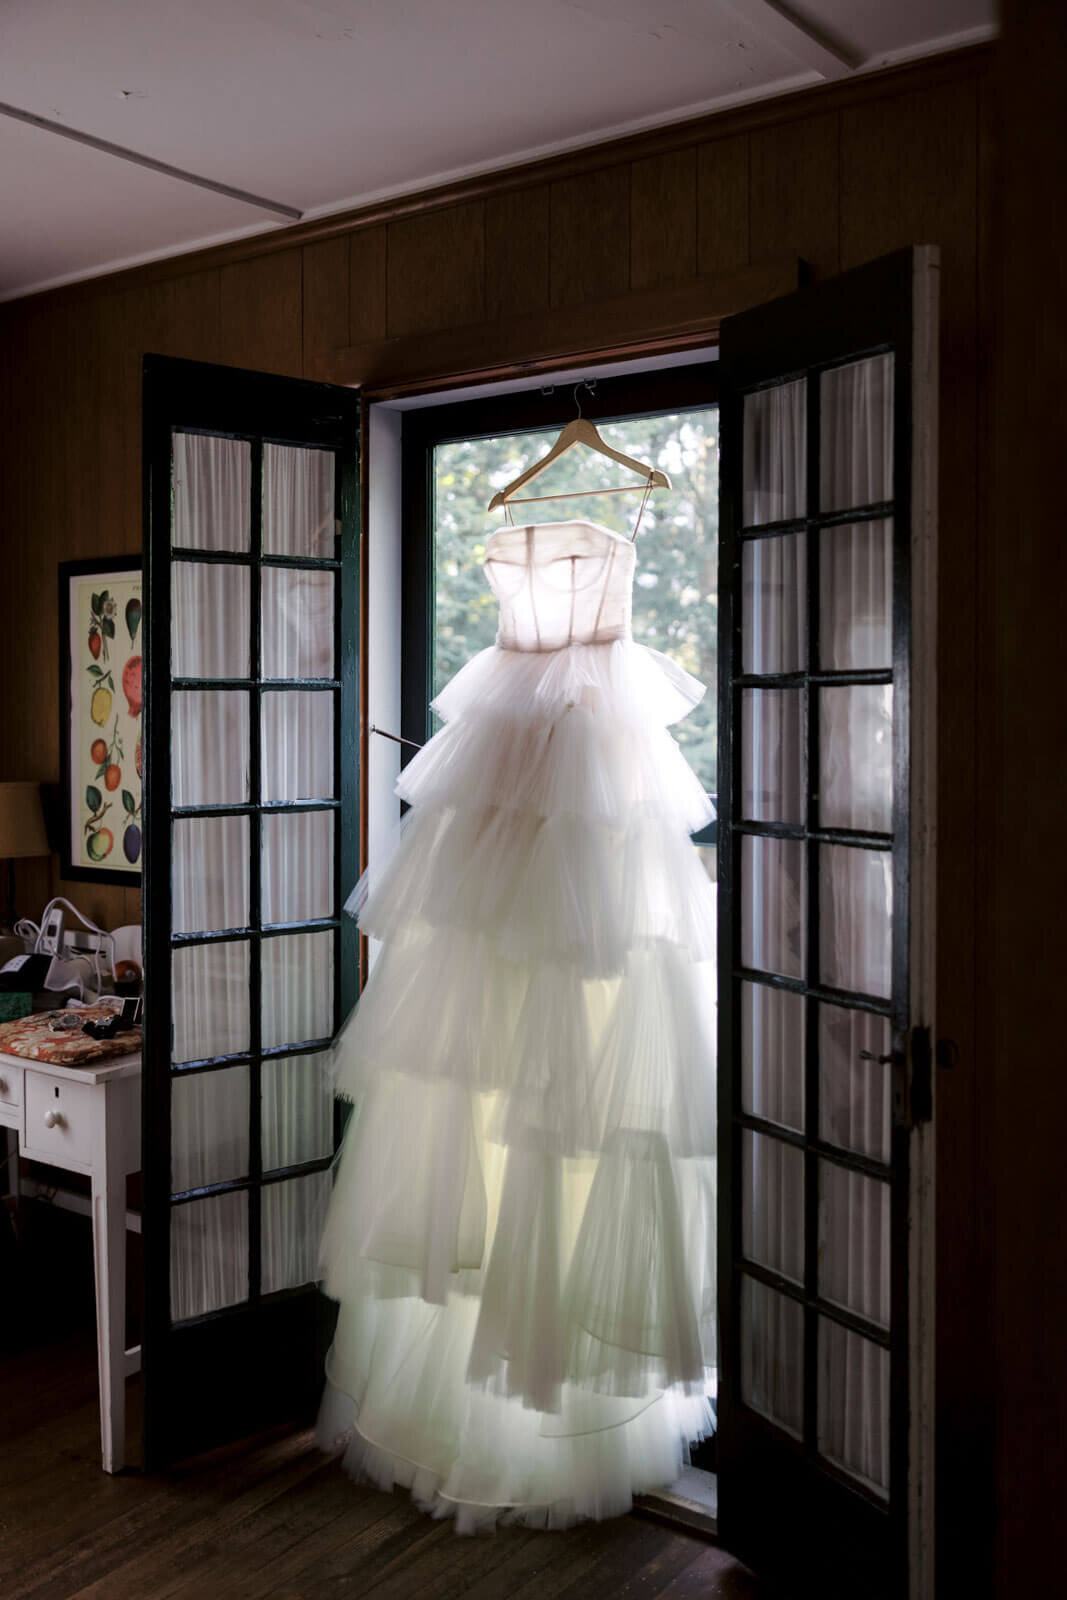 The bride's wedding dress is hung in the middle of two open doors in a room at The Ausable Club, New York.